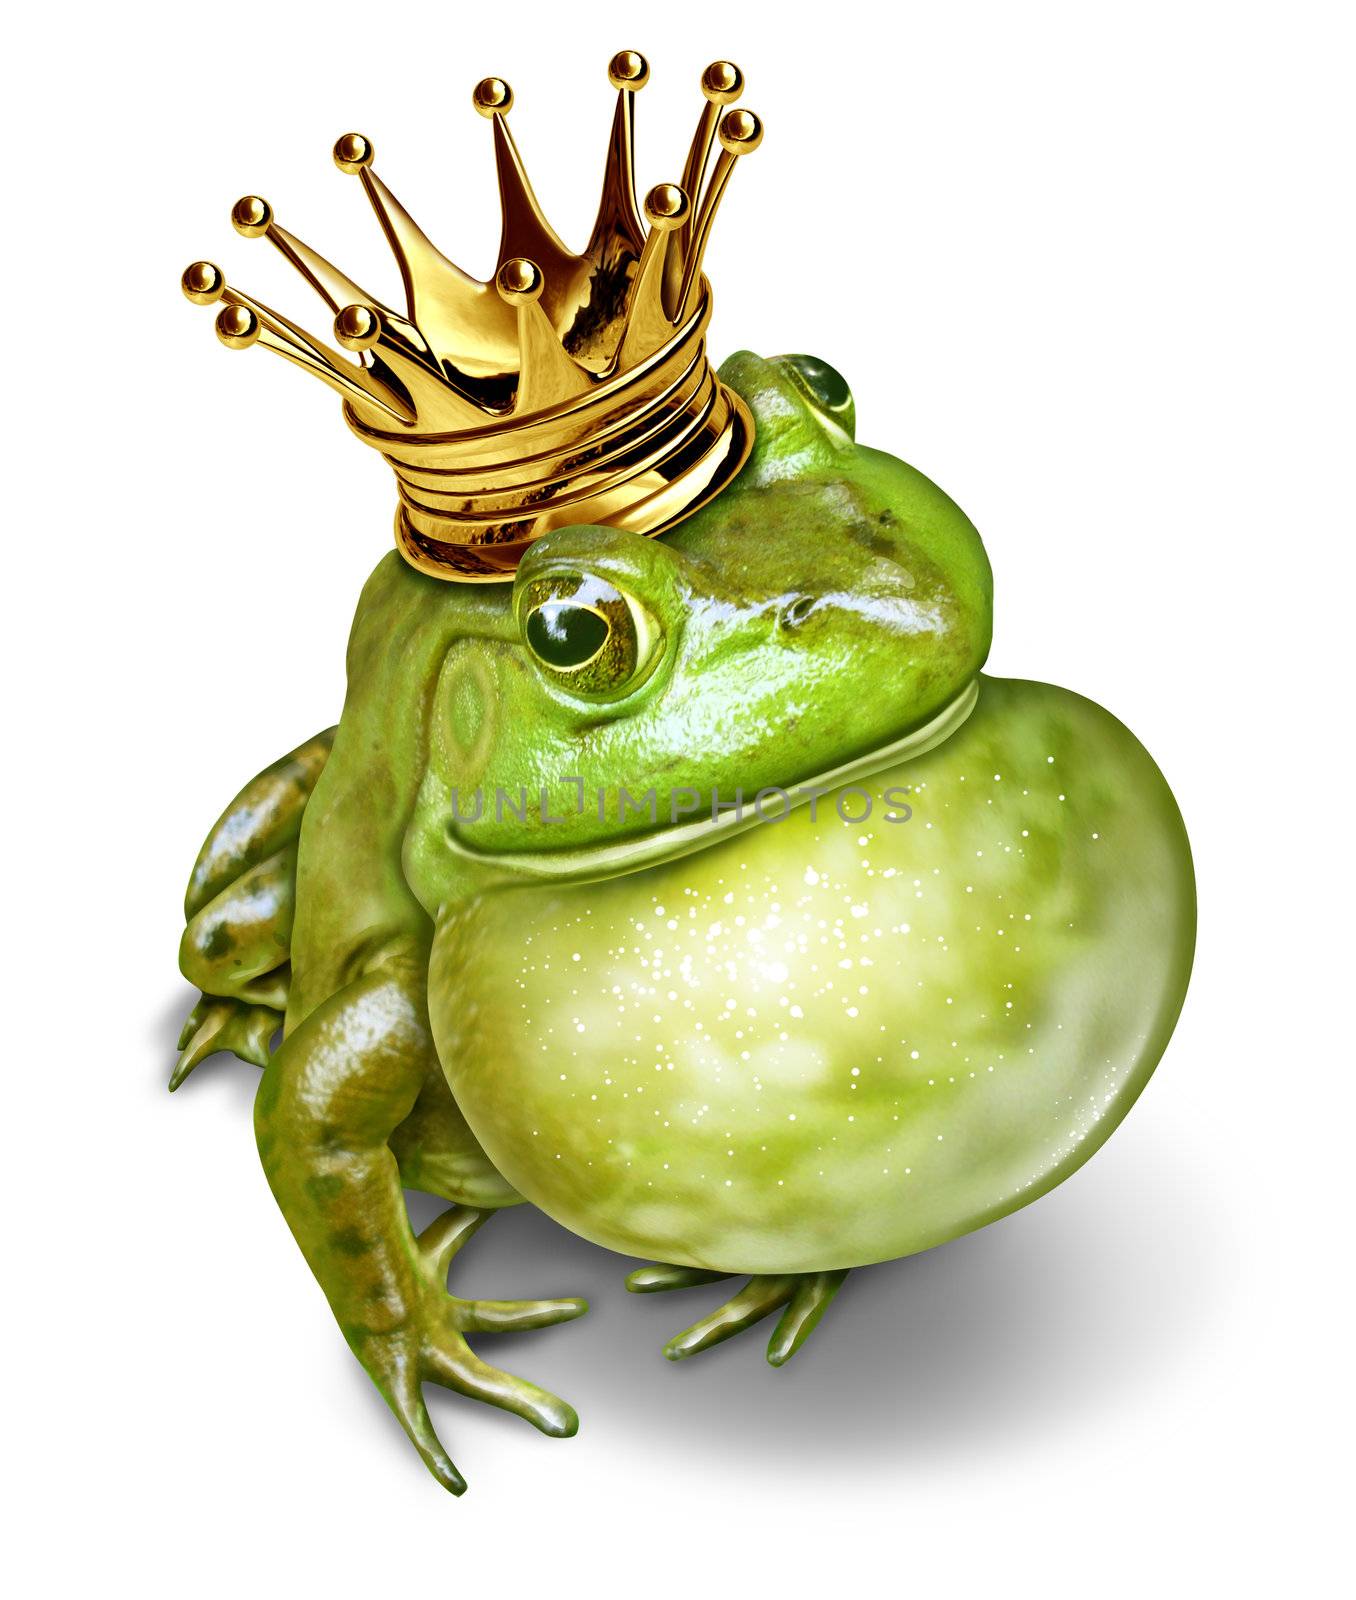 Frog Prince Communication by brightsource